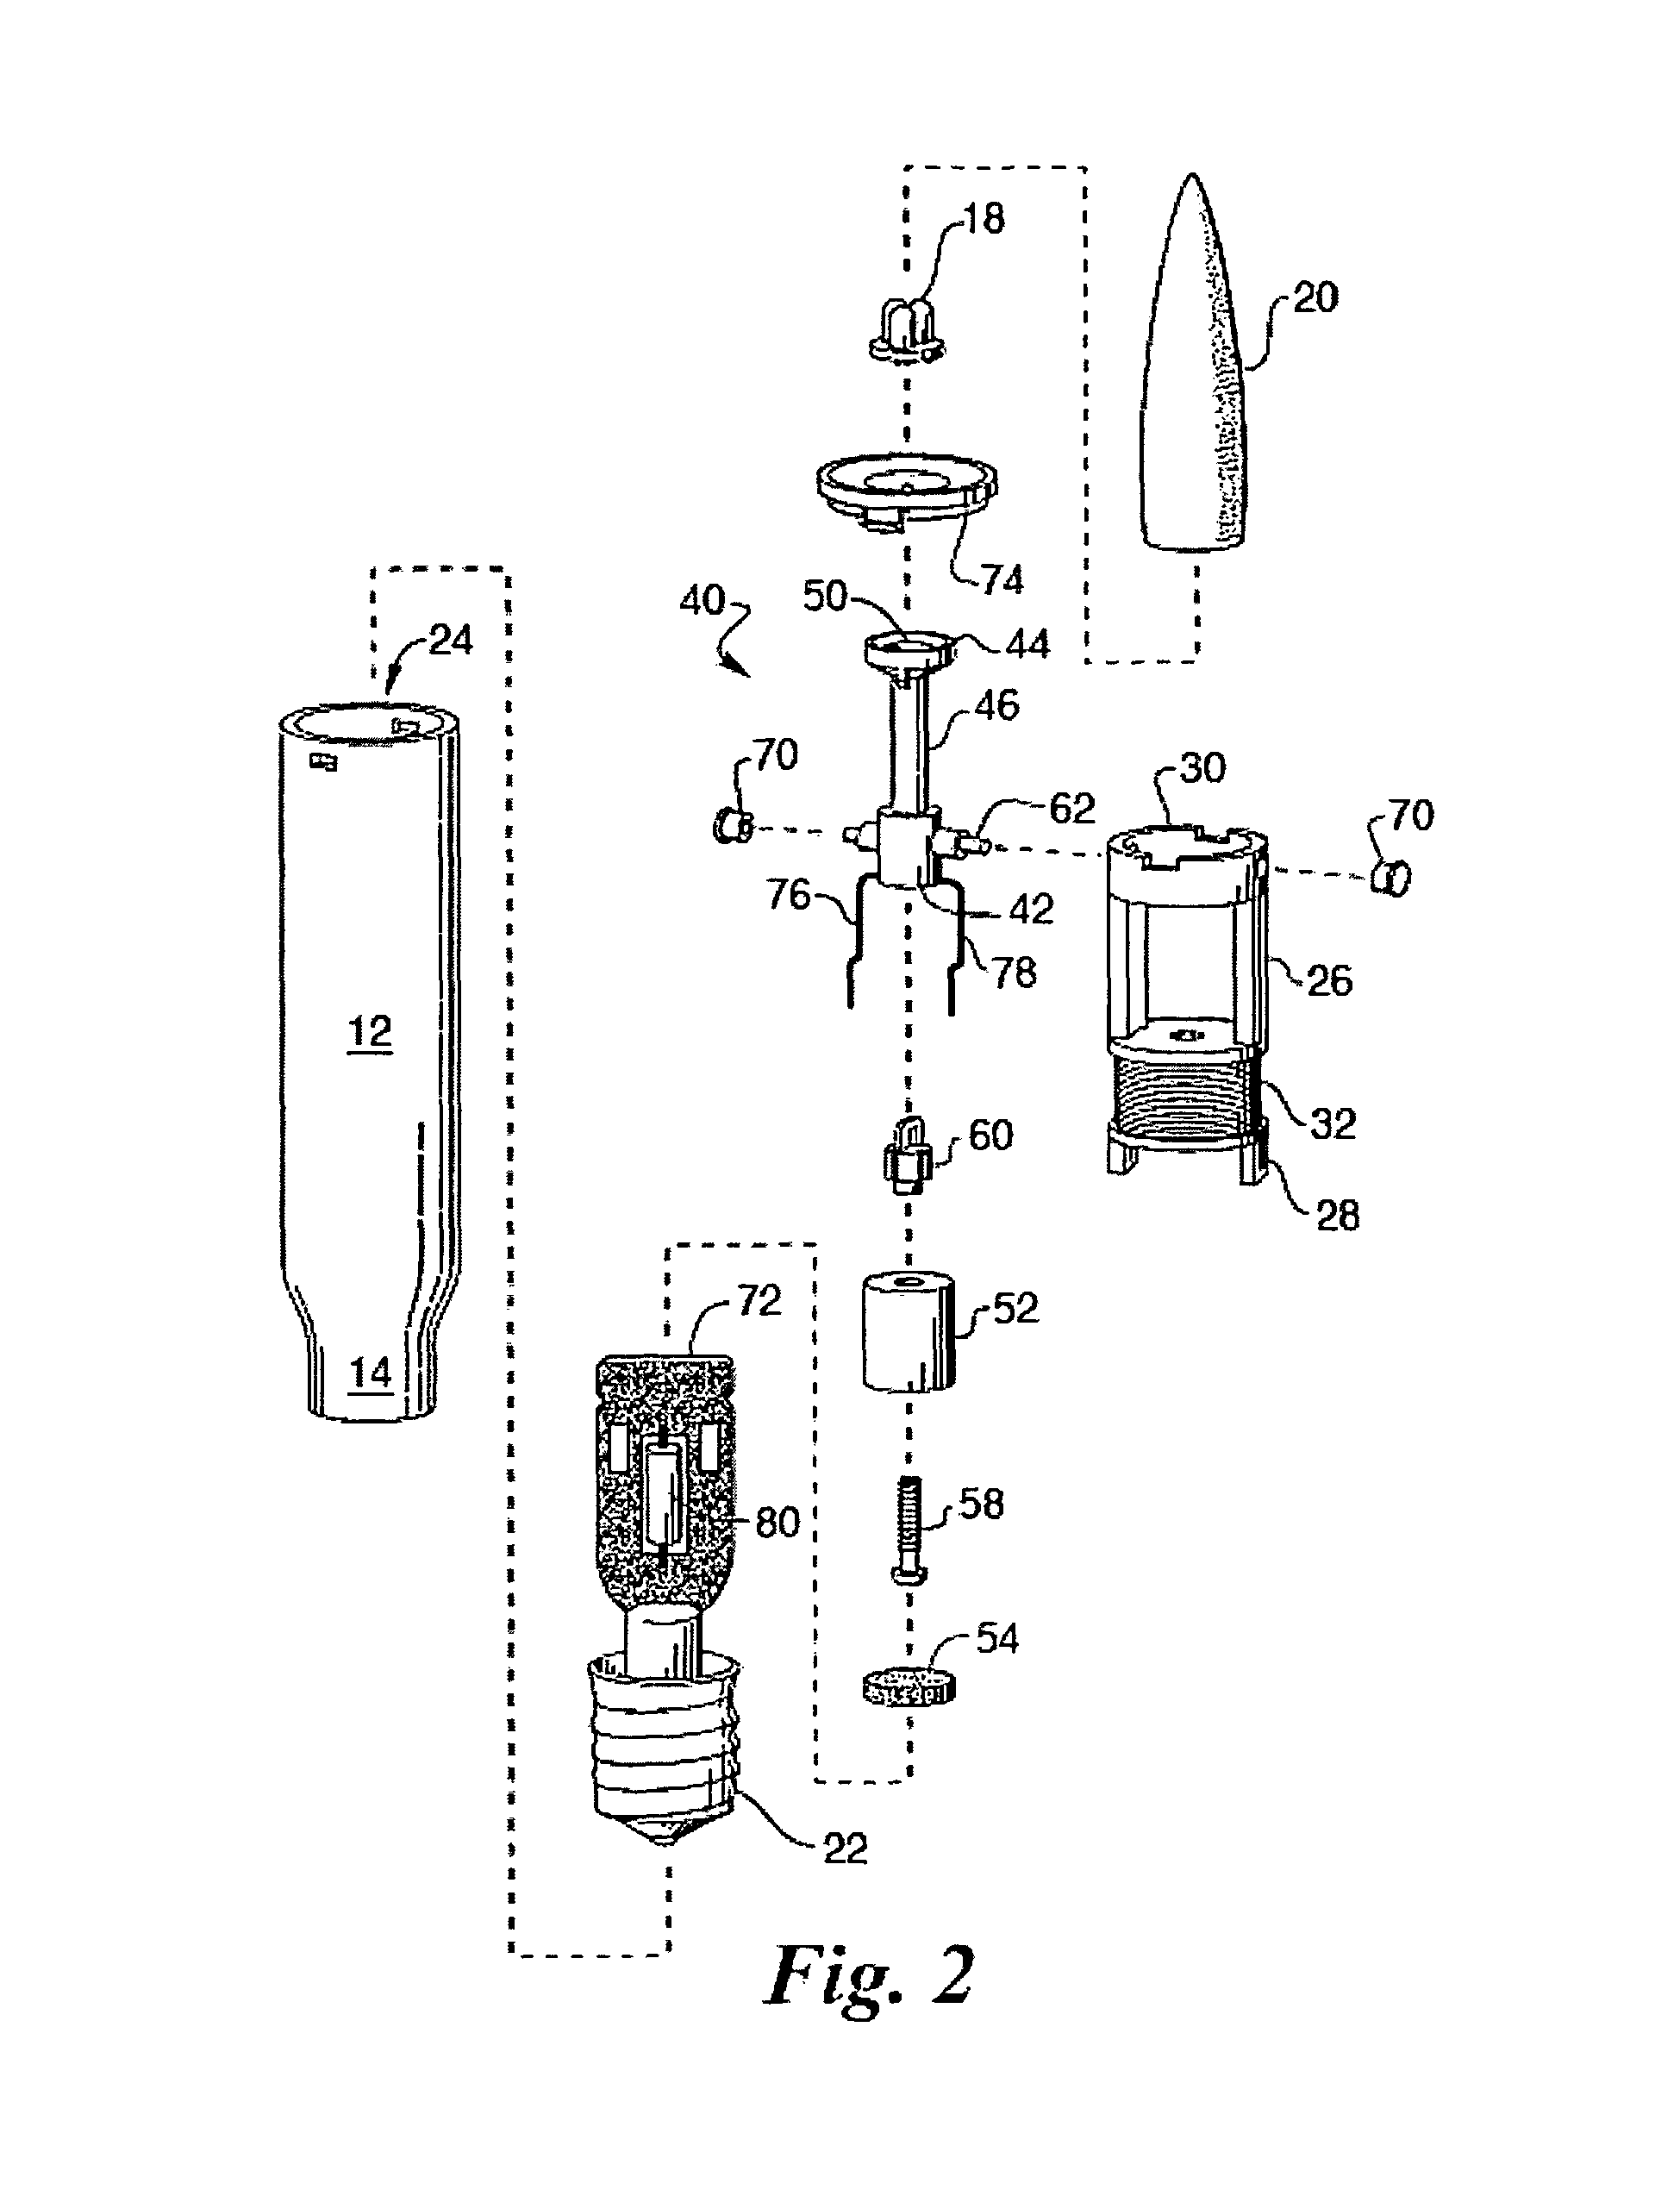 Systems, components, and methods for electronic candles with moving flames